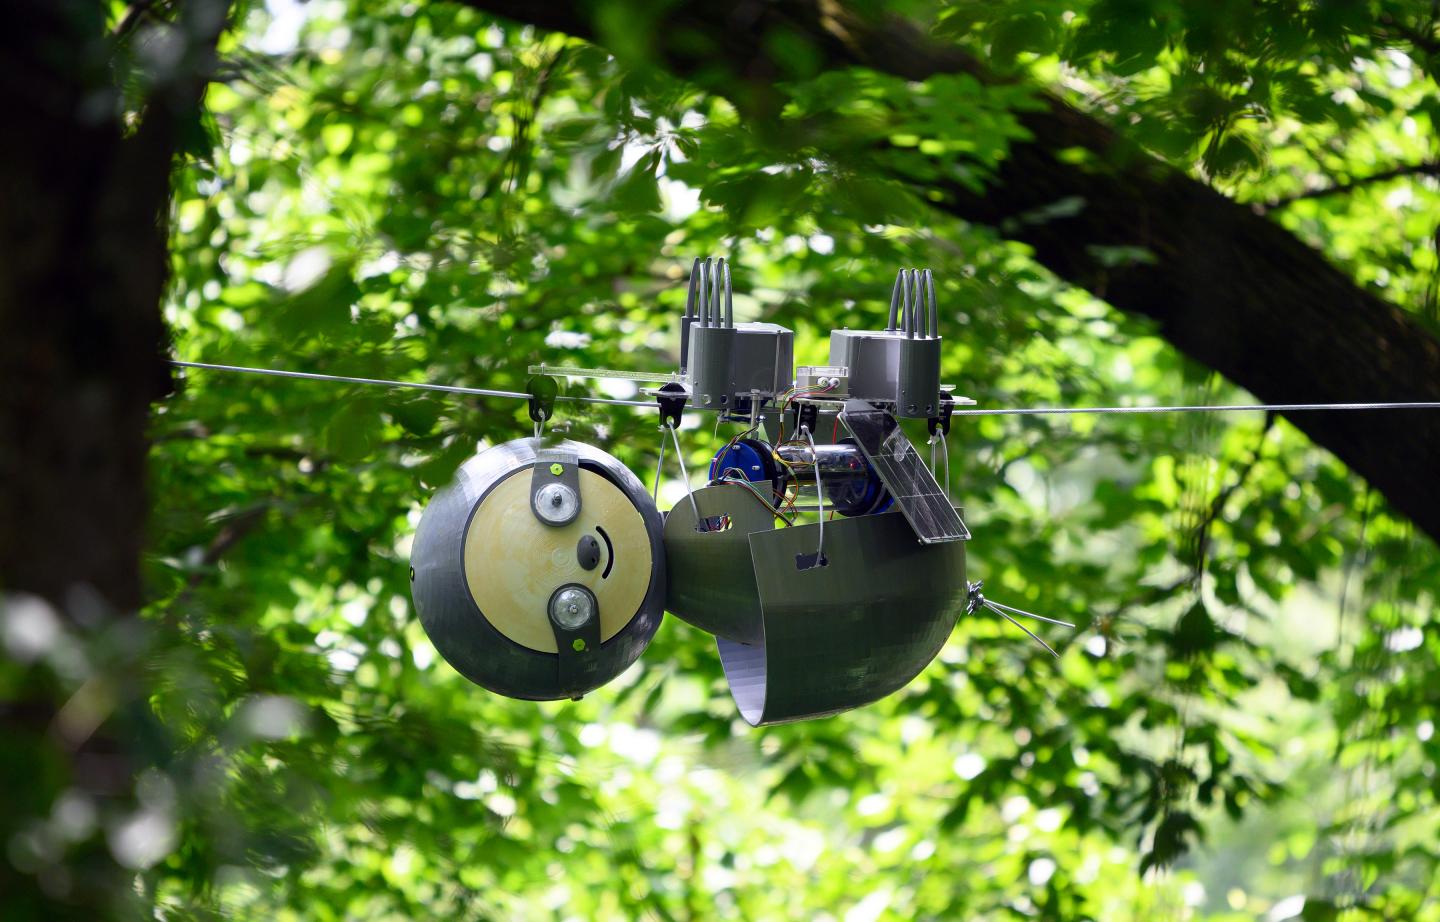 SlothBots, SnotBots, and Robobees: The role of robotics in conservation